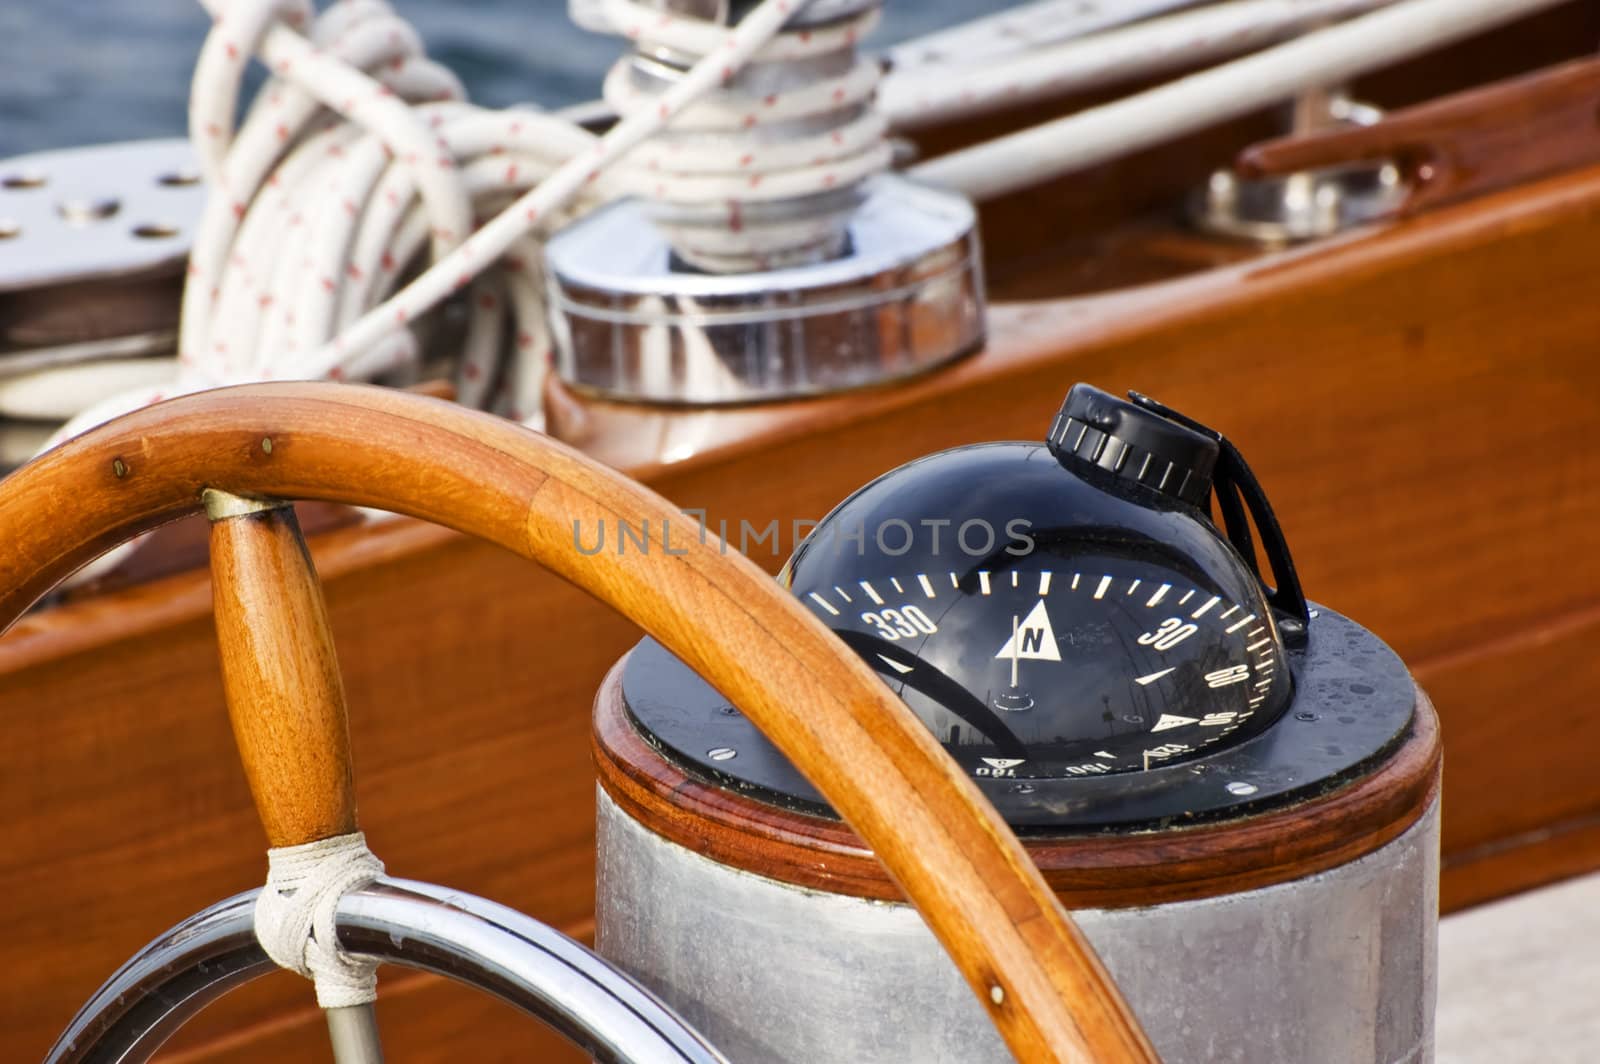 Rudder and compass on a wooden boat